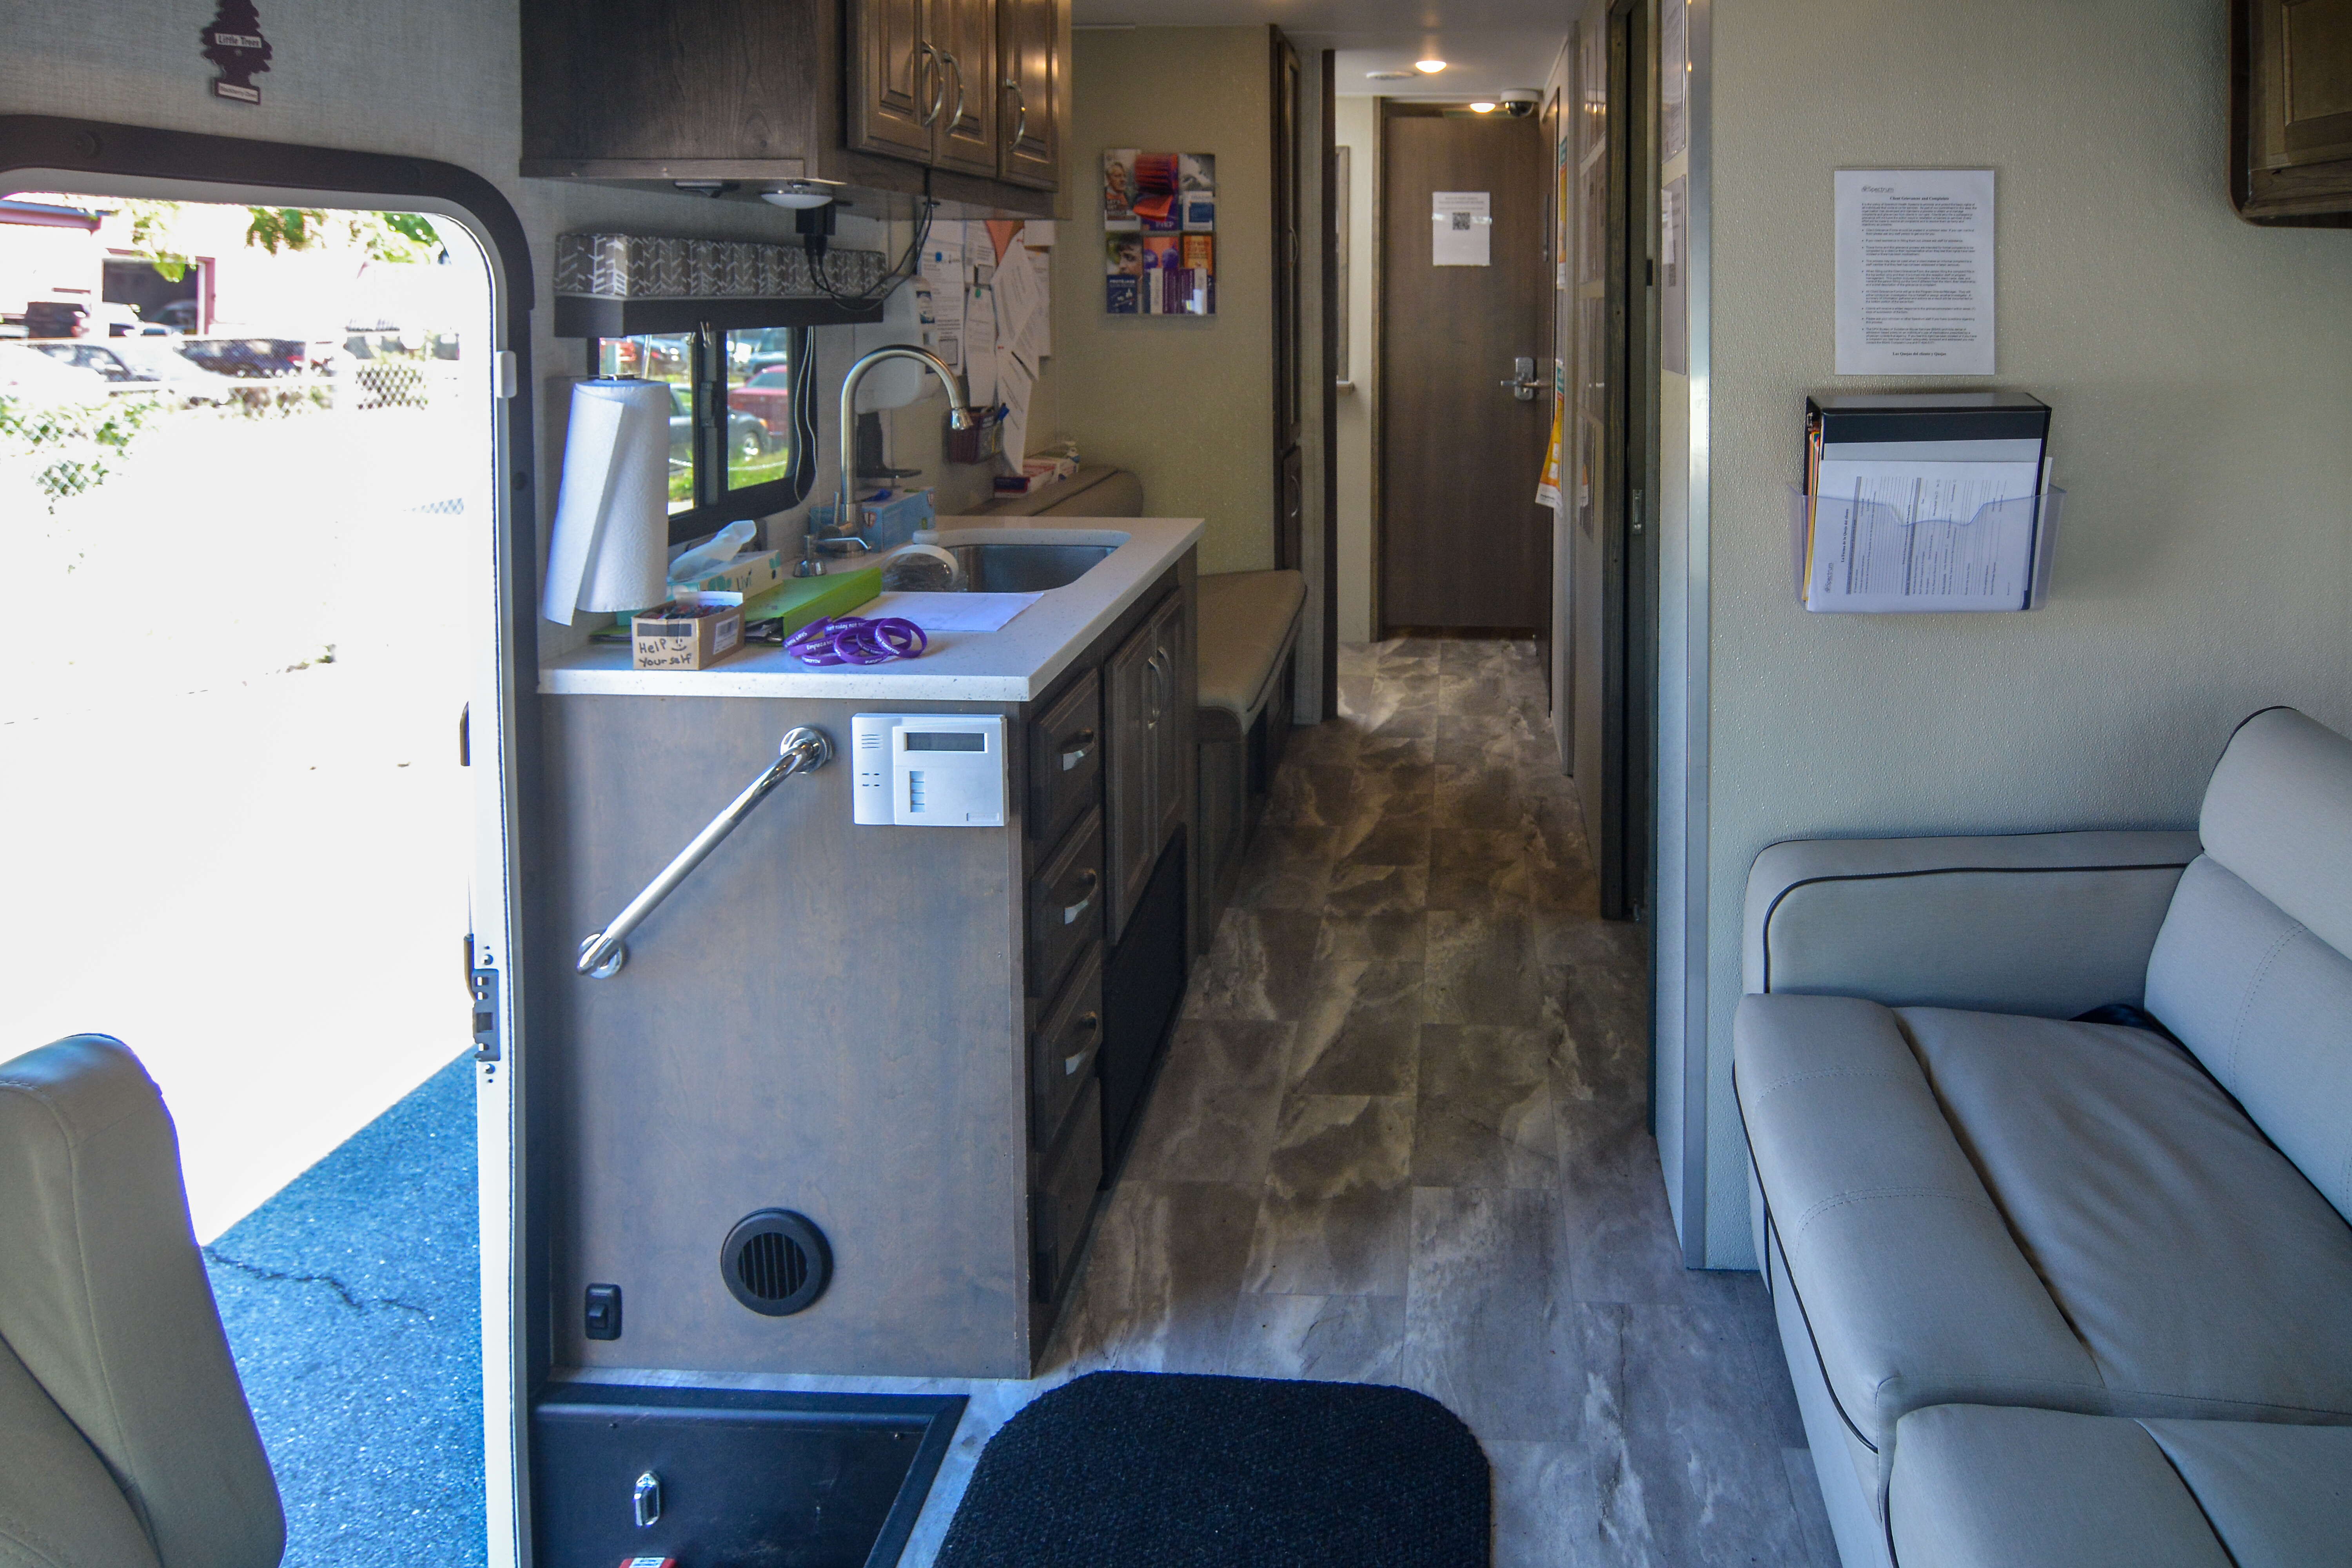 Inside the Spectrum Health Systems mobile treatment van